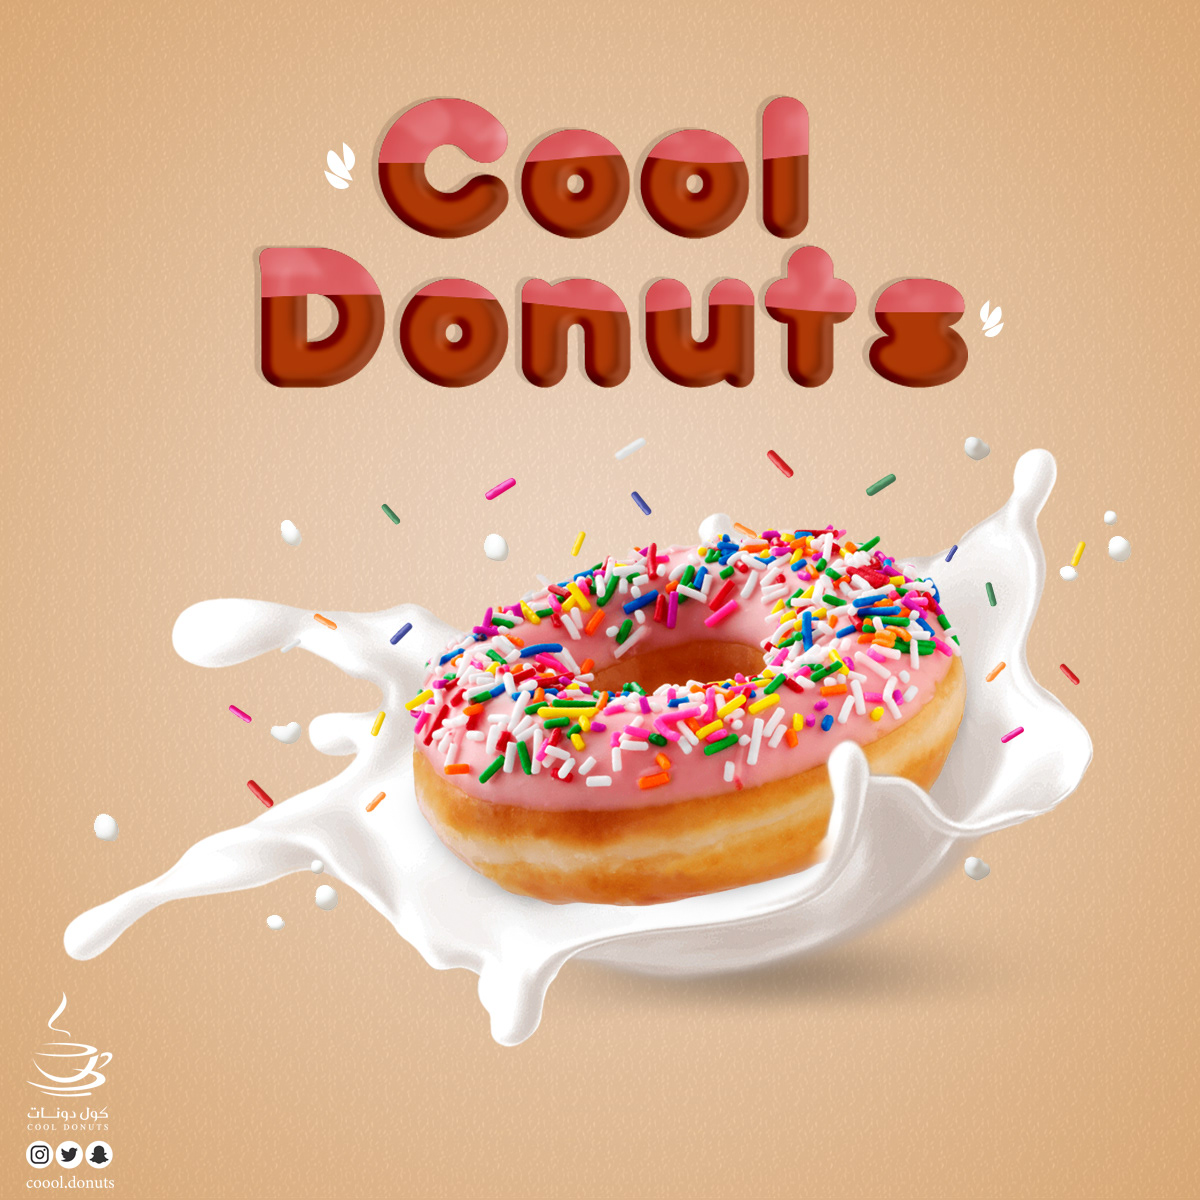 Candies Ads. Donuts ads. product design  Social Media ads Sweets ads.